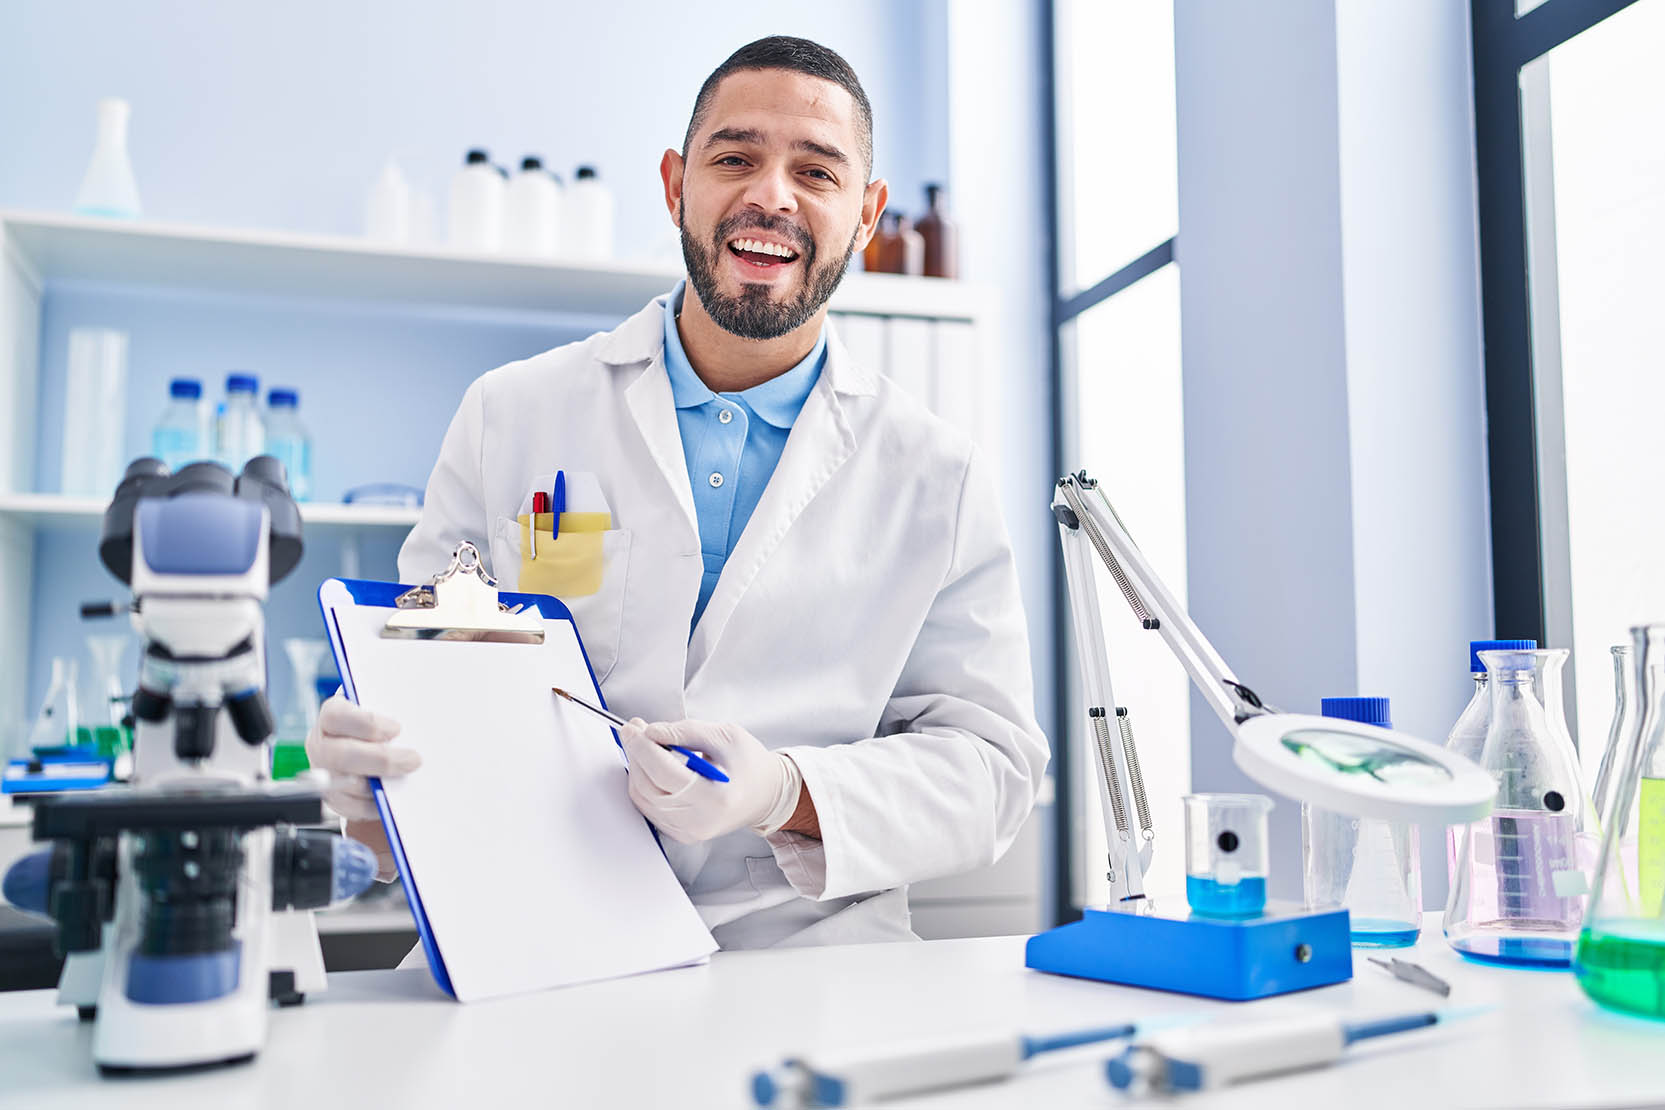 Hispanic,Man,Working,At,Scientist,Laboratory,Holding,Blank,Clipboard,Smiling